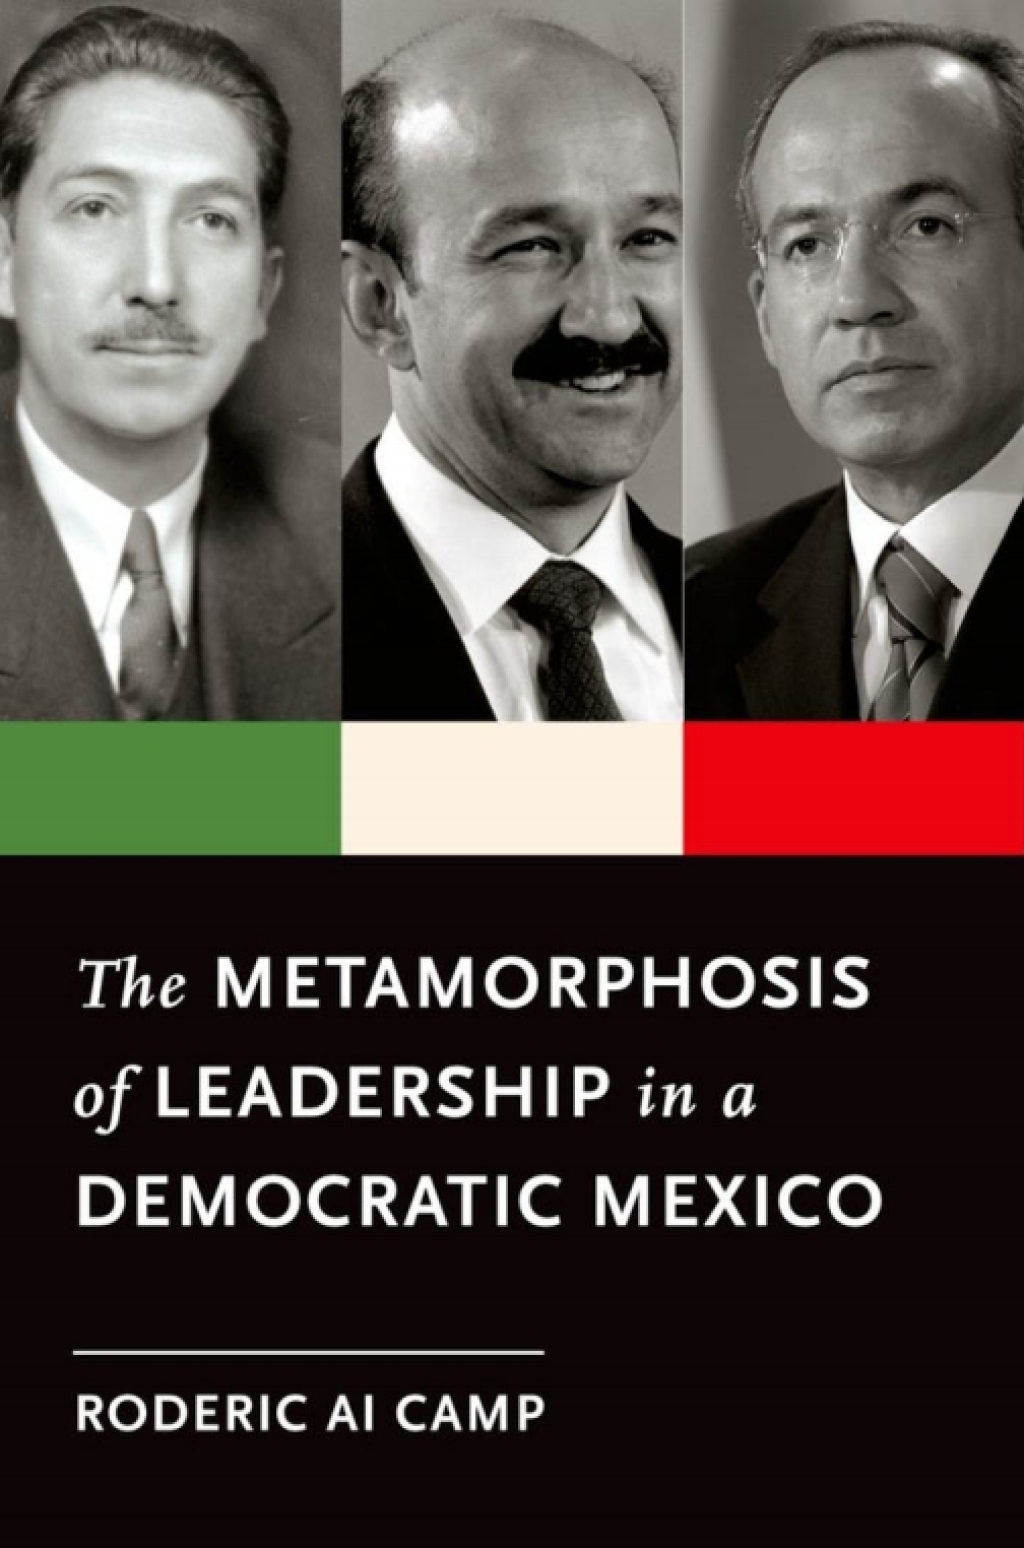 The Metamorphosis of Leadership in a Democratic Mexico (eBook Rental) - Roderic Ai Camp,